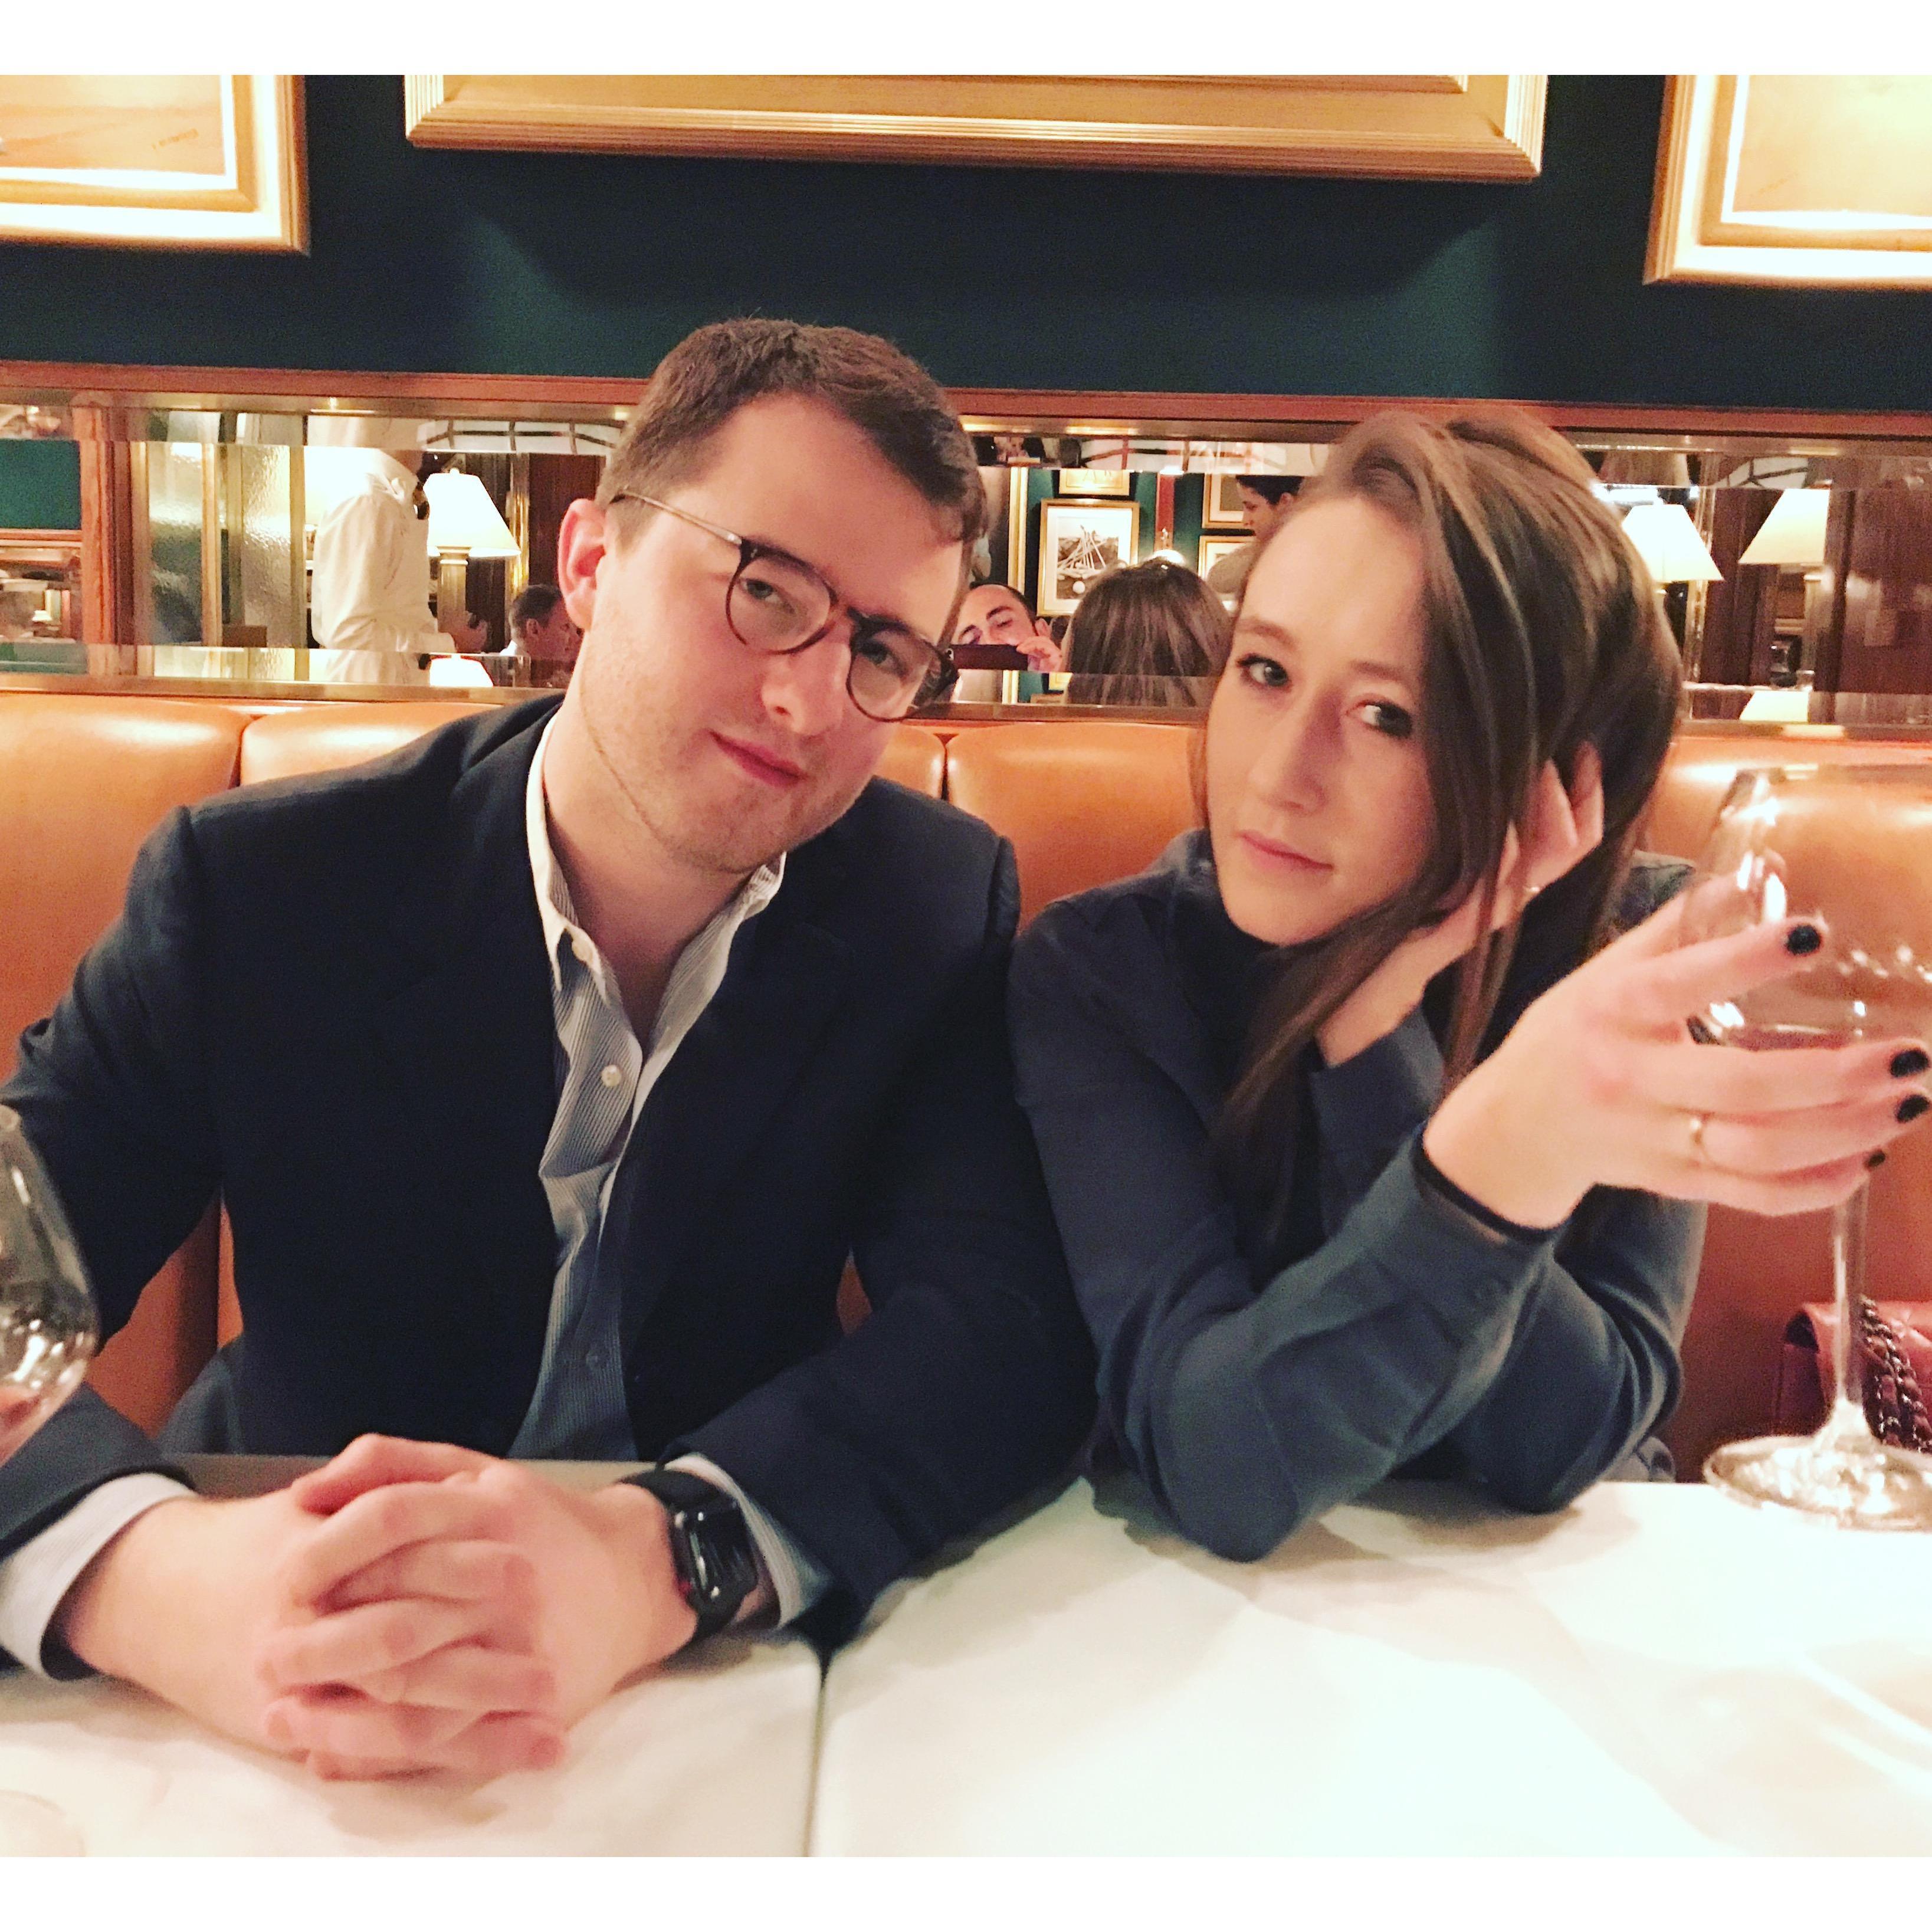 Celebrating Nate's Birthday at The Polo Bar in New York. February 5th, 2018